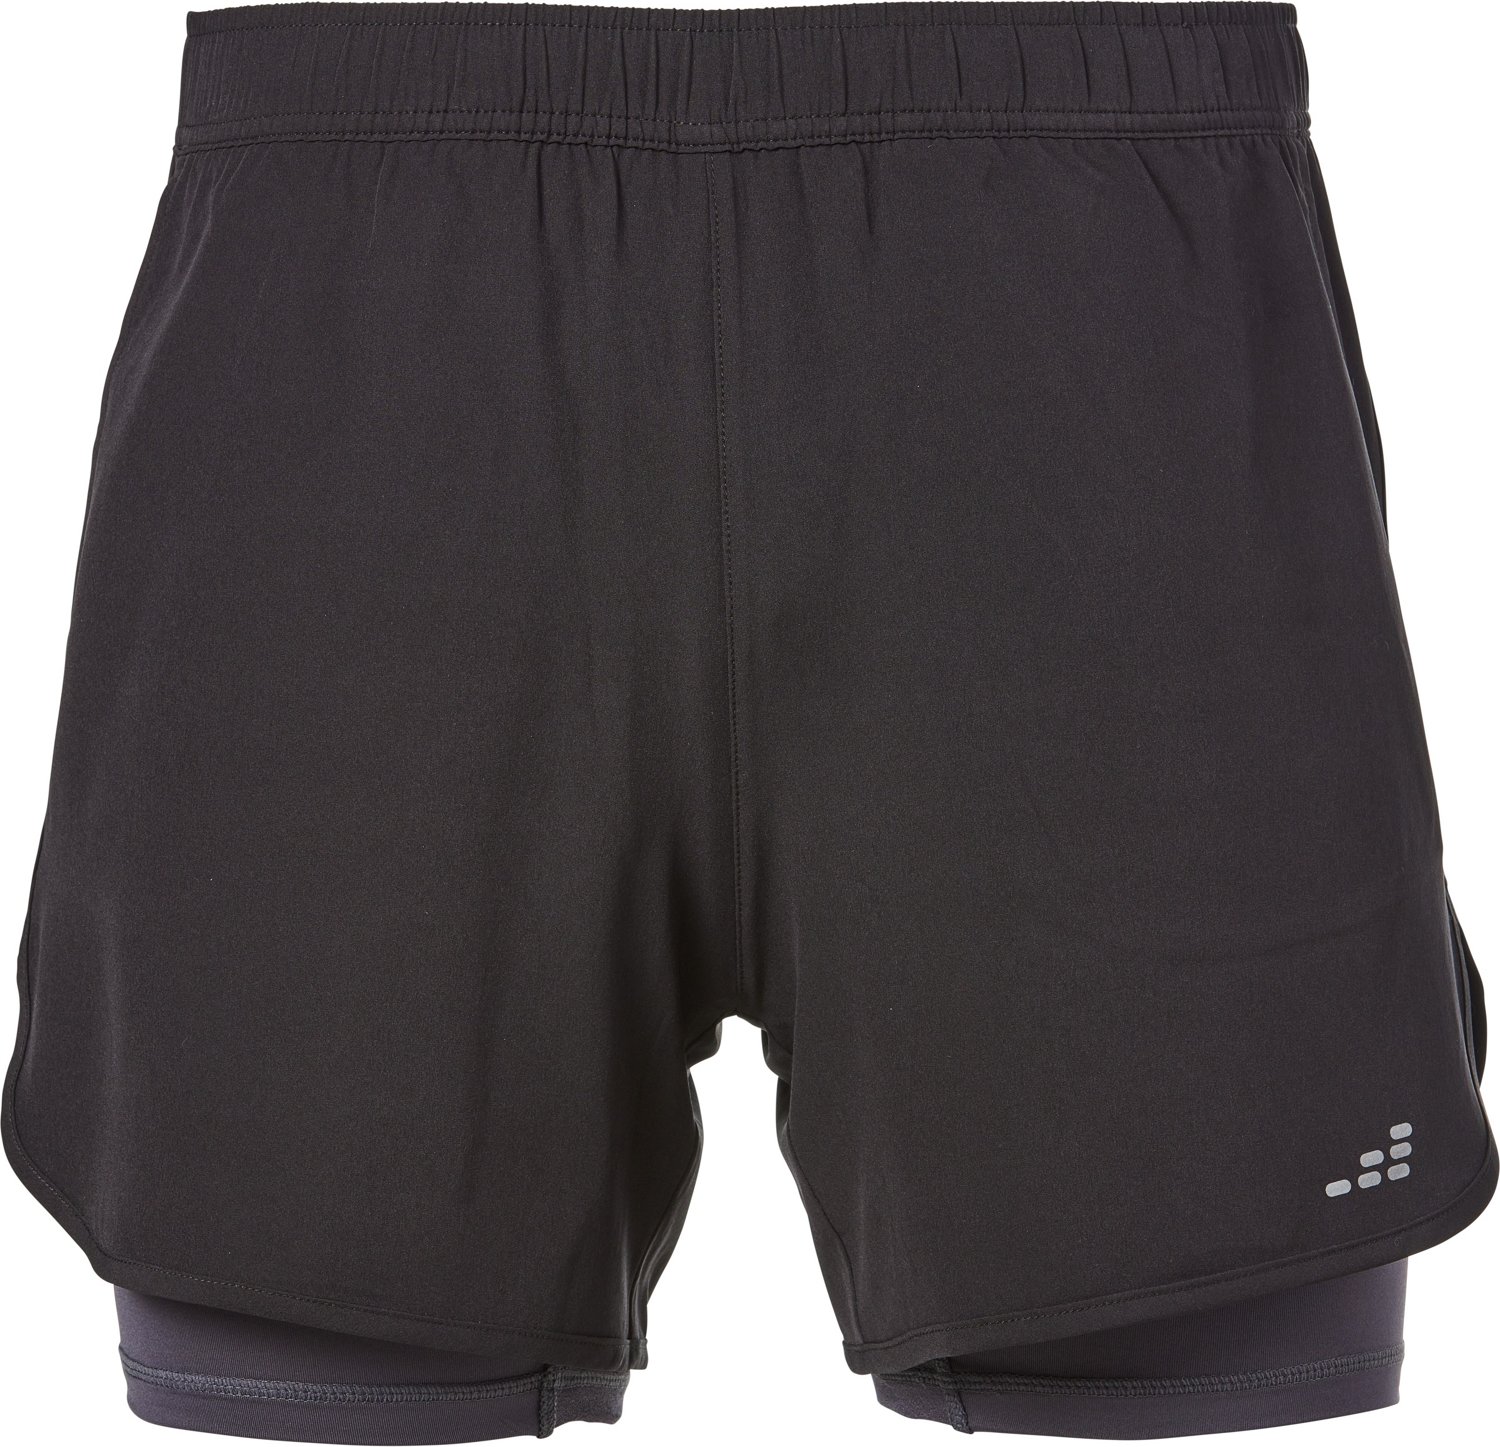 Fashion Men's 2 In 1 Running Shorts With Pockets Compression Liner @ Best  Price Online